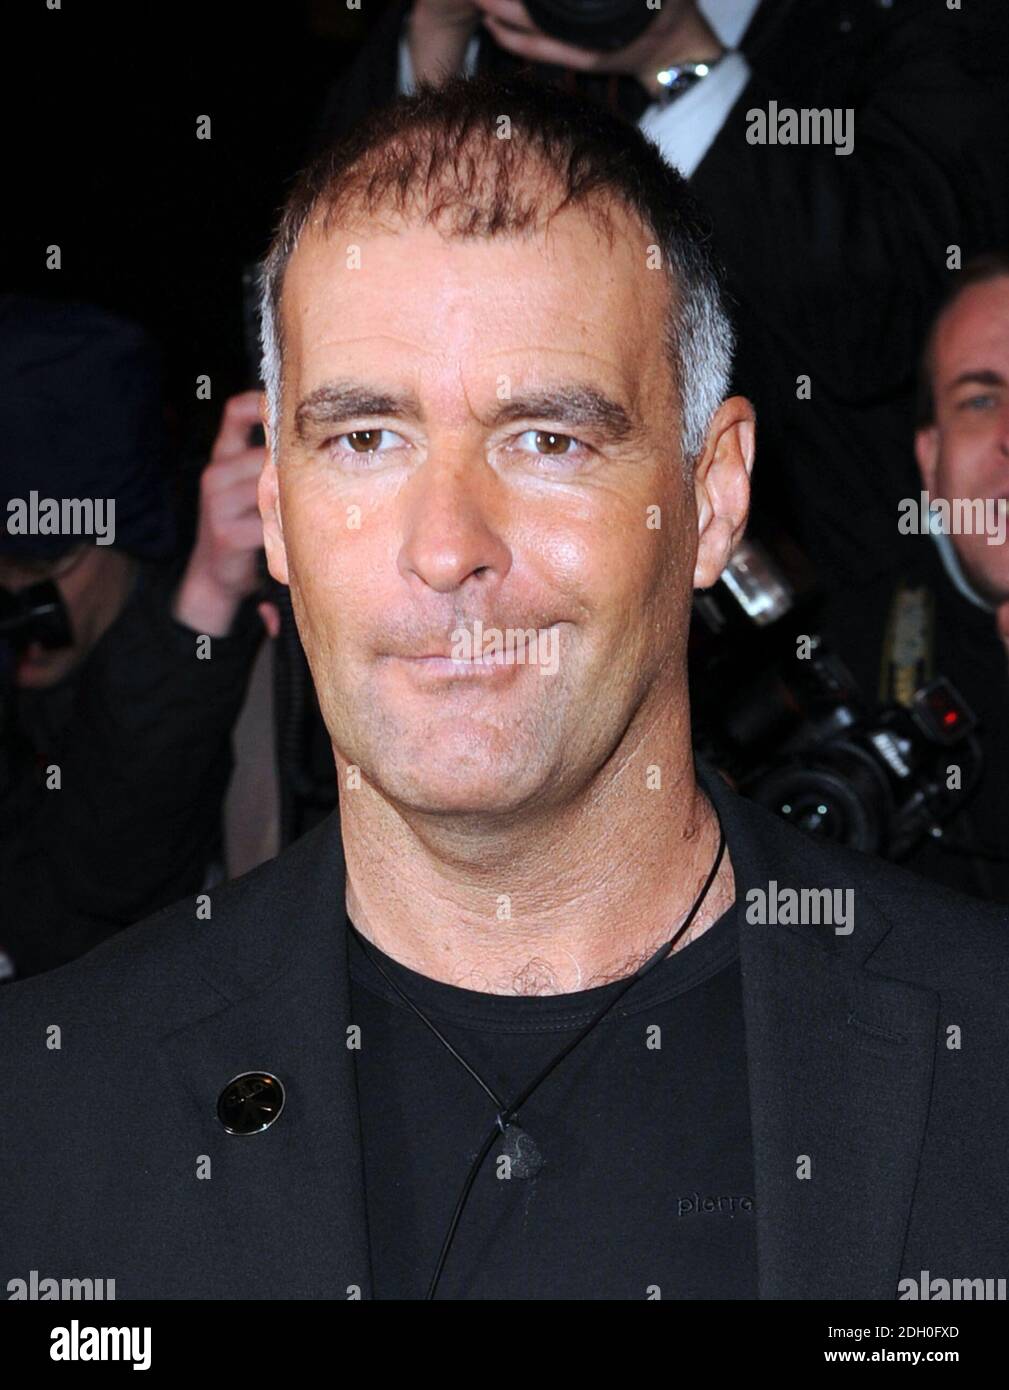 Tommy Sheridan arrives to enter the Celebrity Big Brother house at Elstree Studios in Borehamwood, Hertfordshire. Stock Photo